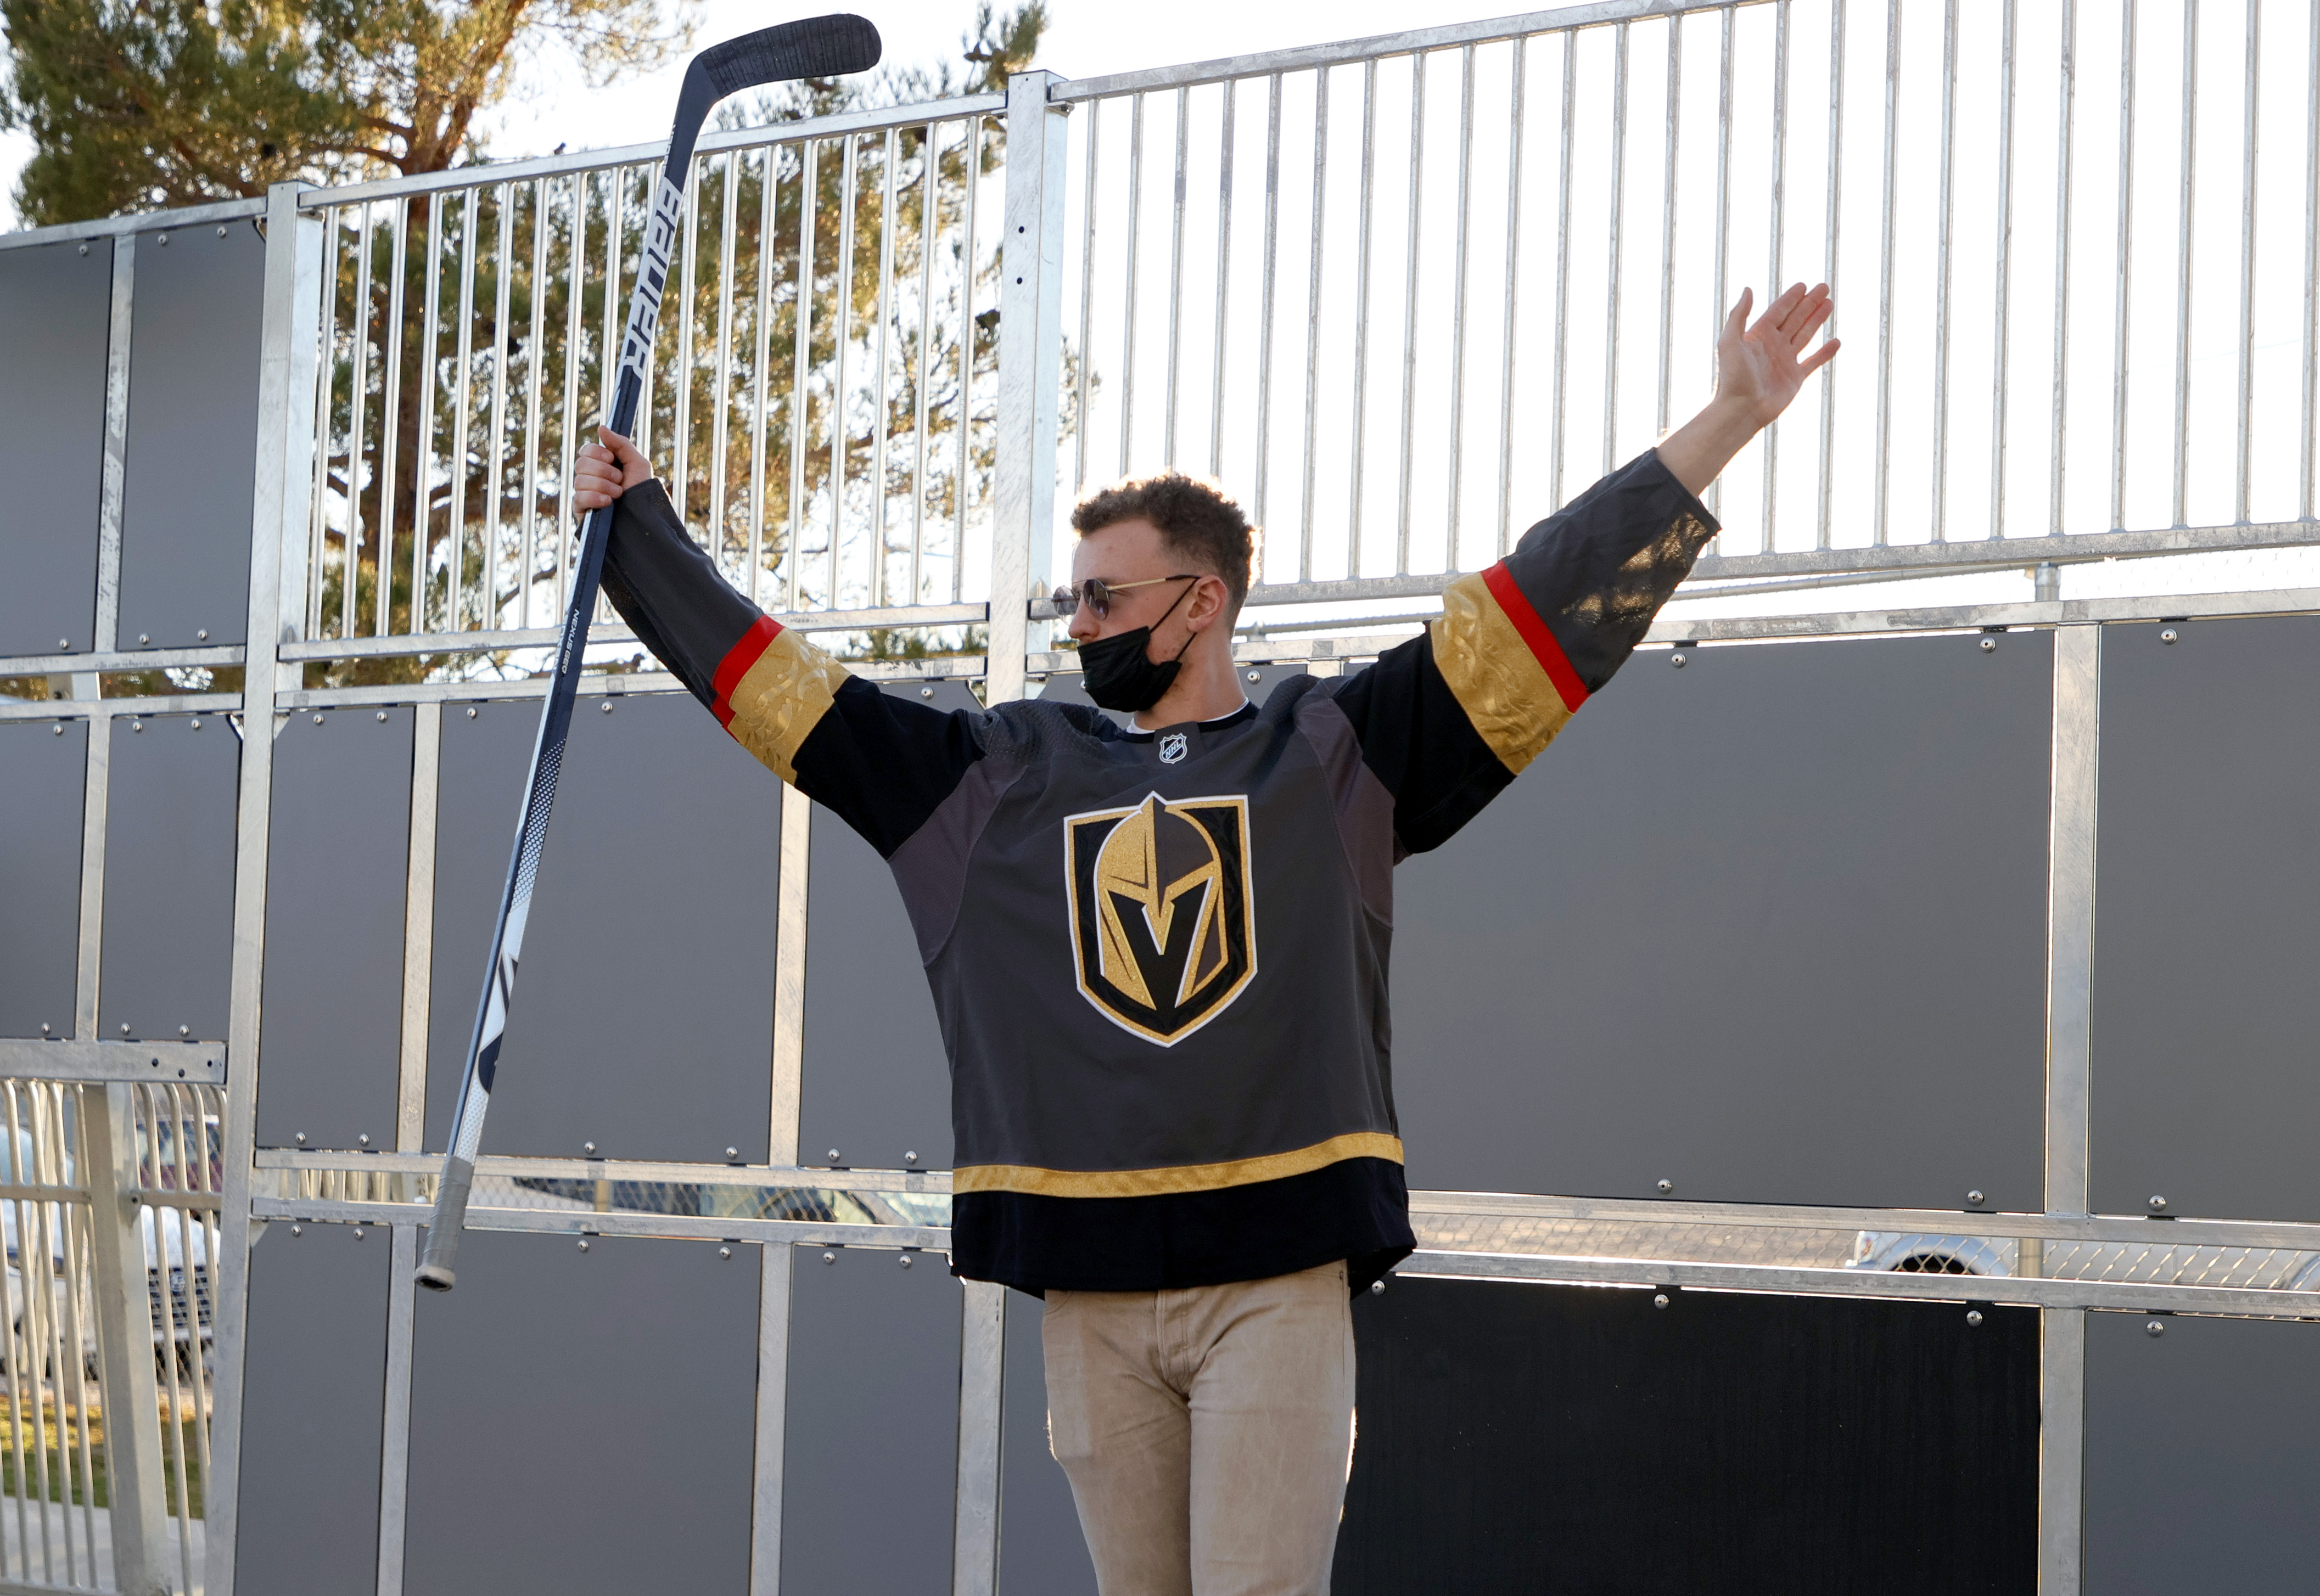 New Vegas Golden Knights Player Jack Eichel Visits Youth At Ball Hockey Rink In North Las Vegas